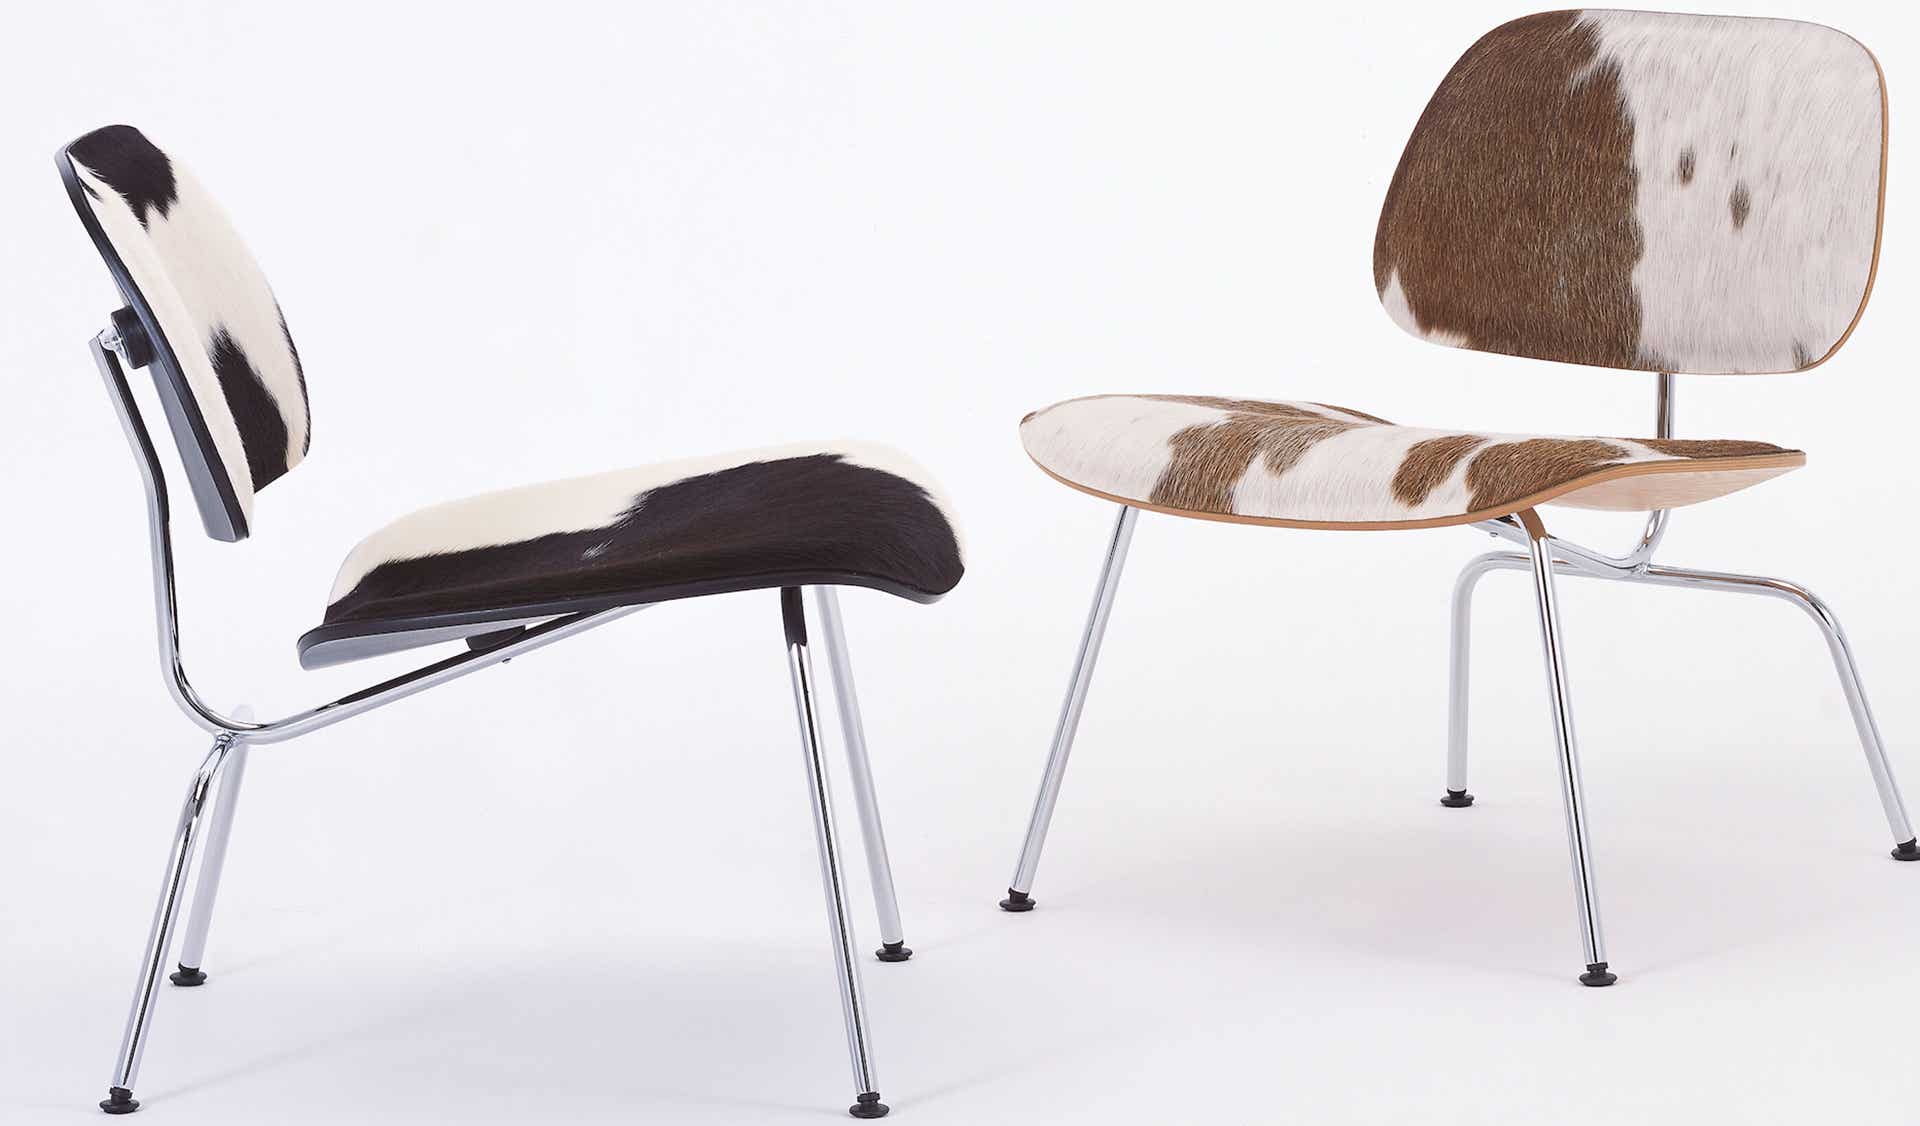 Fauteuil LCM (Lounge Chair Metal) Plywood Group Charles & Ray Eames, 1945/46